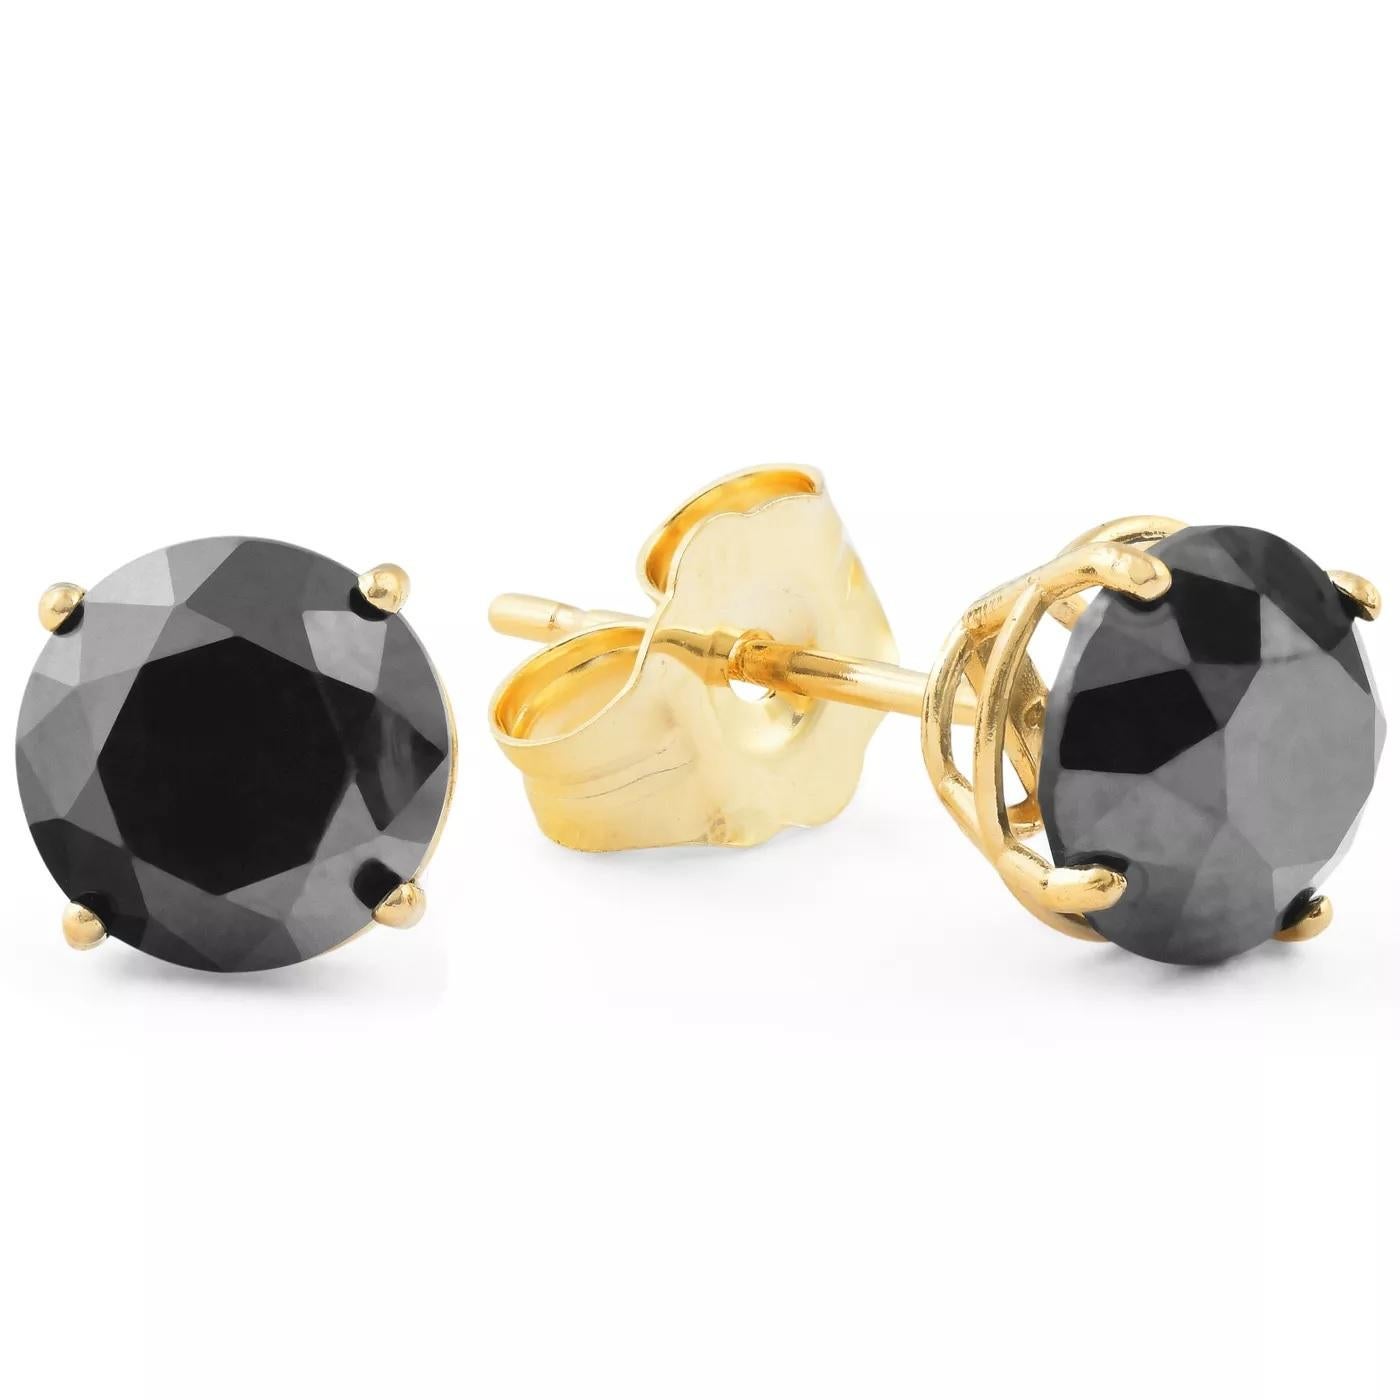 Alluring and refined, these diamond stud earrings are sure to be noticed. Created in 14 K yellow gold, the earring showcases a beguiling 2.11 carat natural black diamond solitaire measuring 7.20 x 7.21 x 5.60mm. Exquisitely made and Captivating with